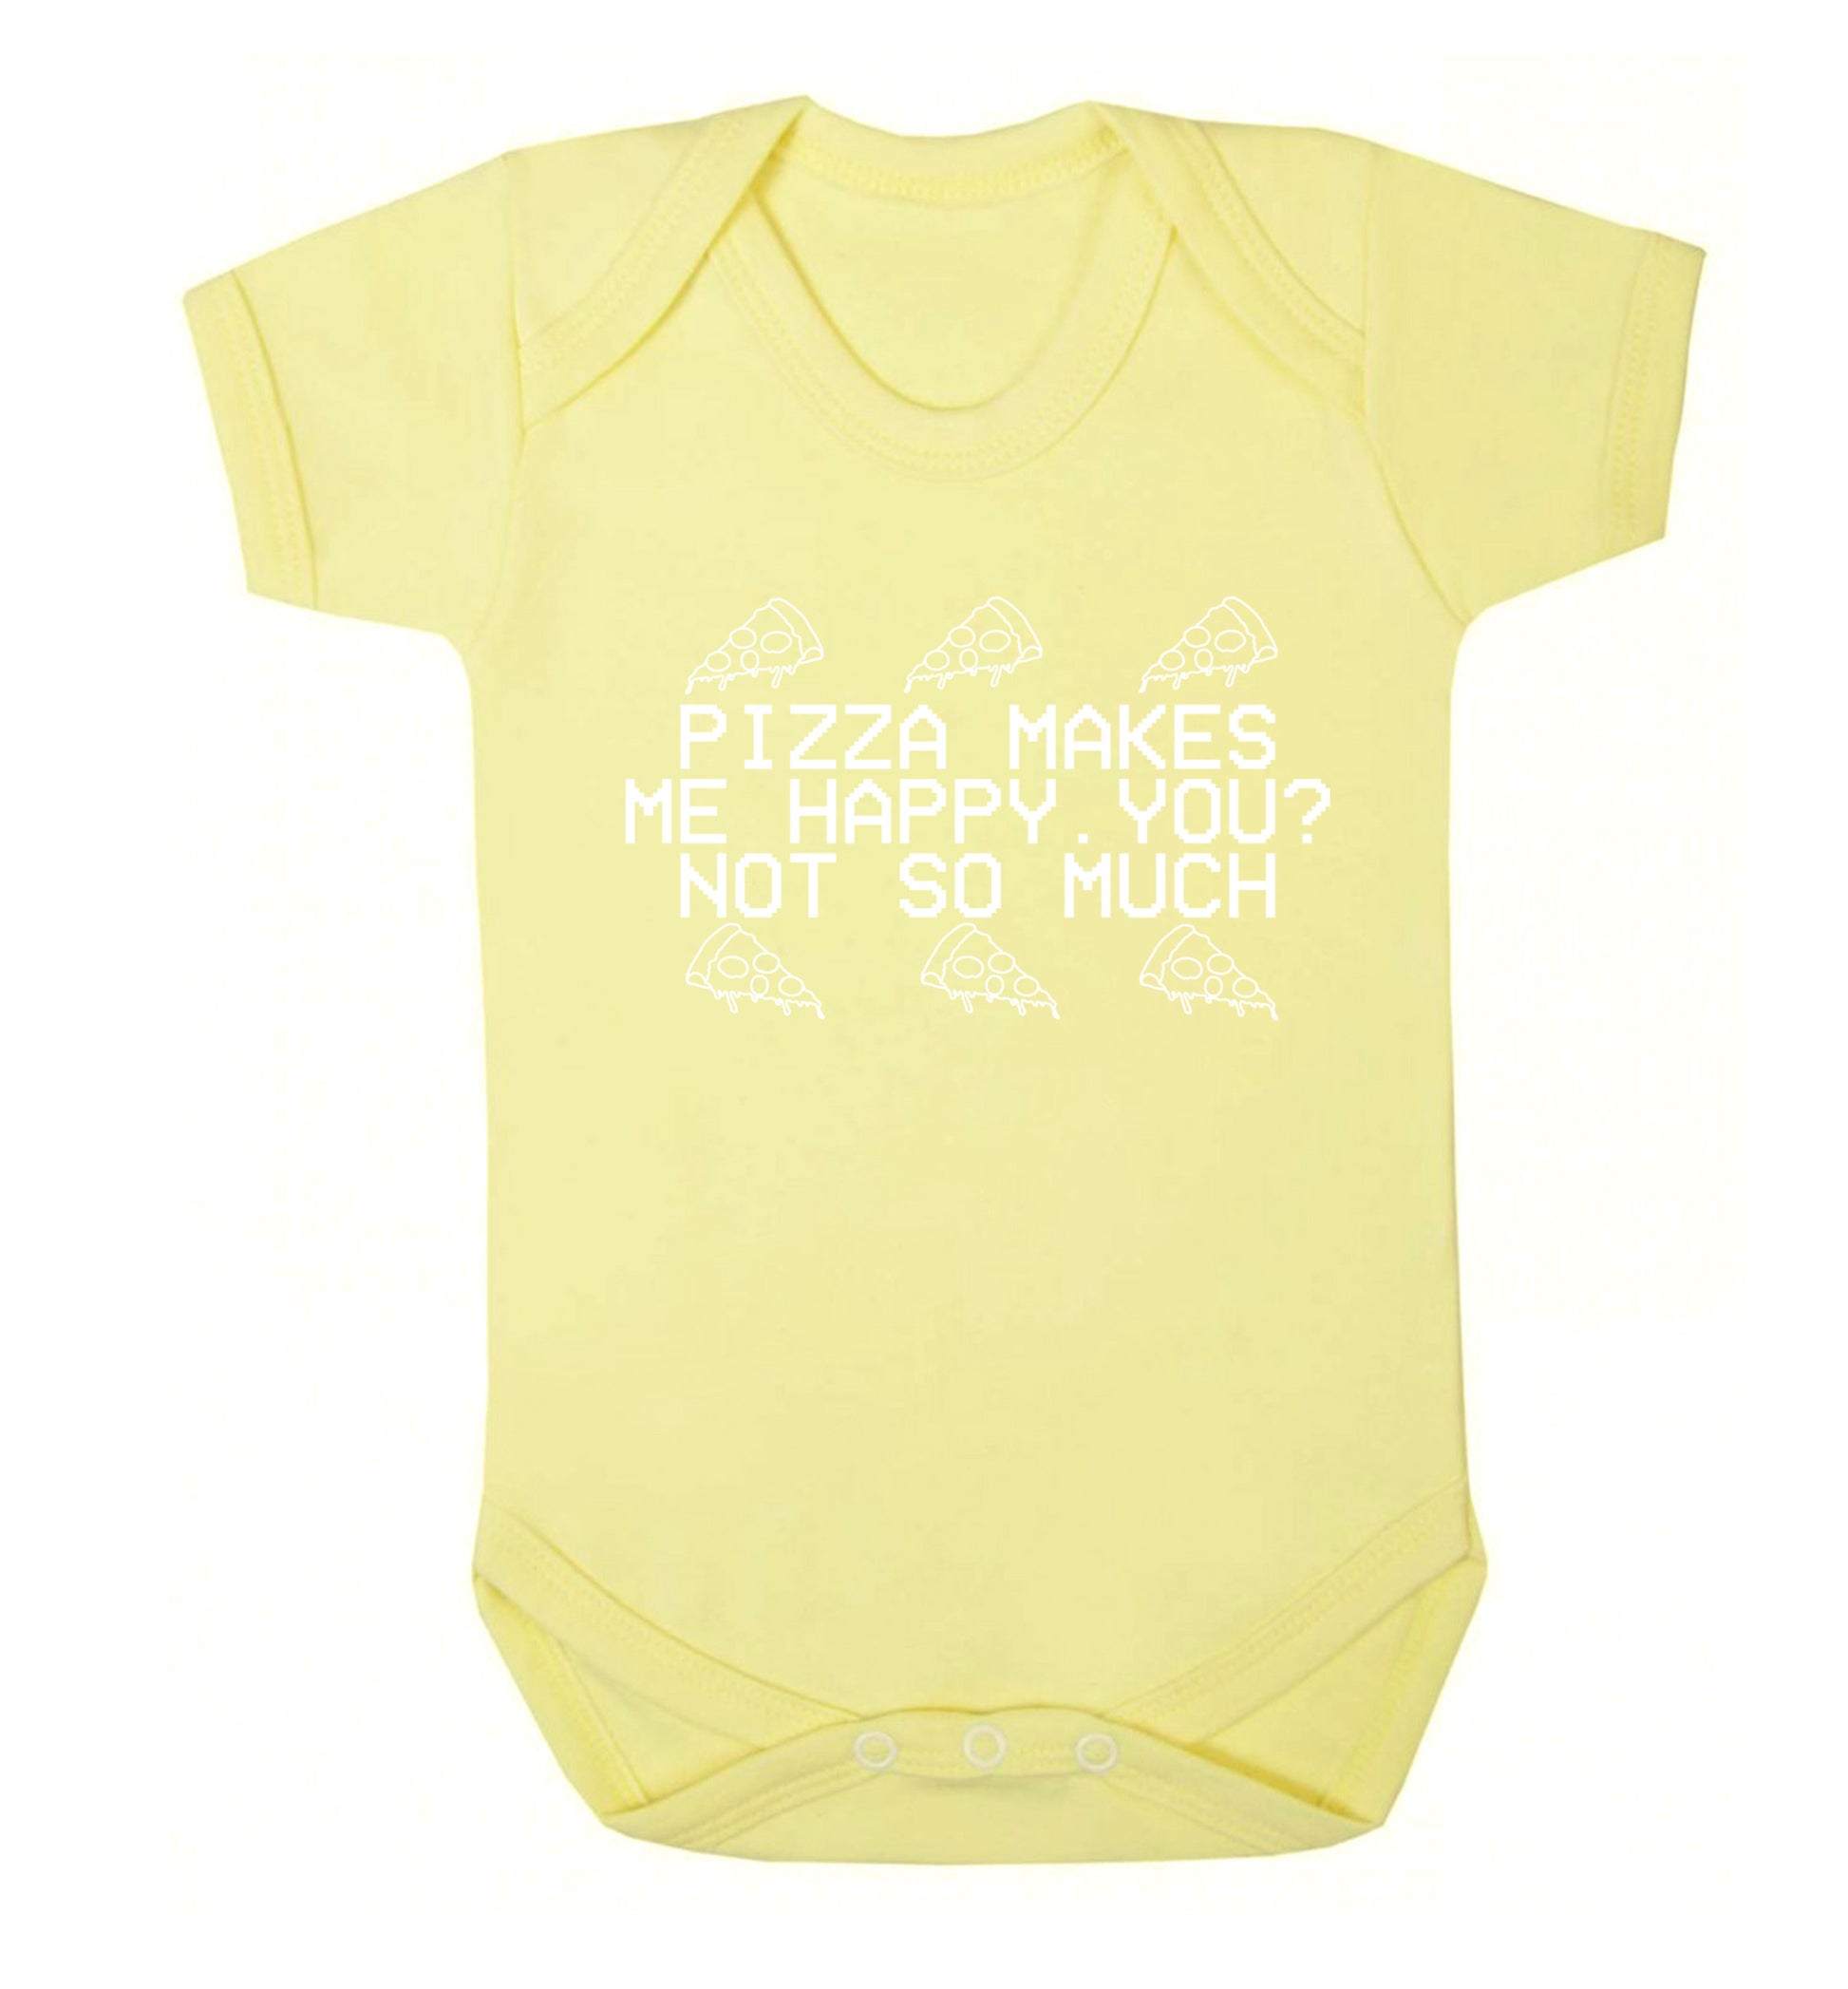 Pizza makes me happy, You? Not so much Baby Vest pale yellow 18-24 months